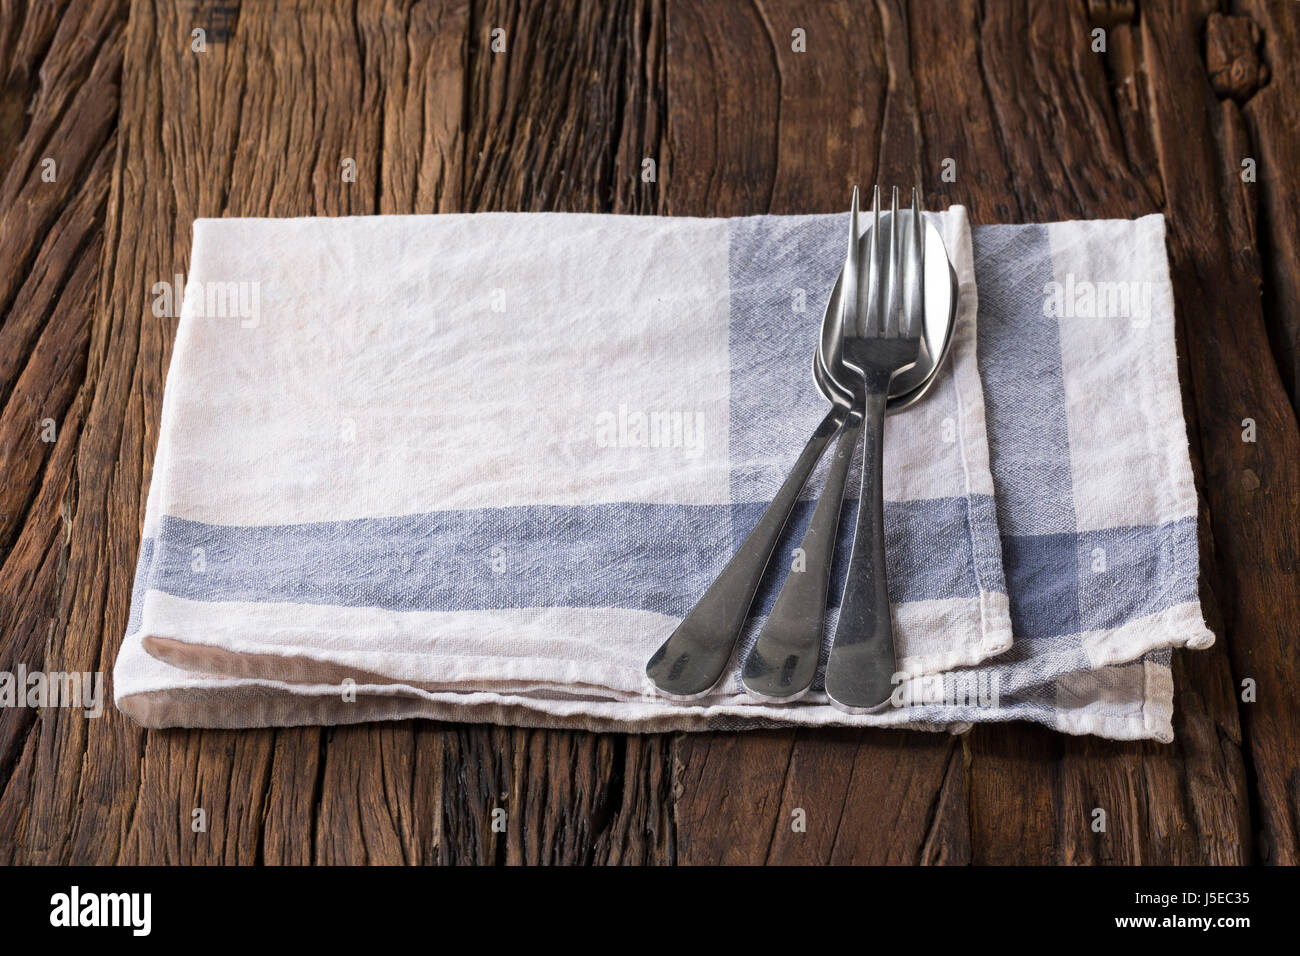 Empty dinner table setting at a rustic kitchen table. Stock Photo